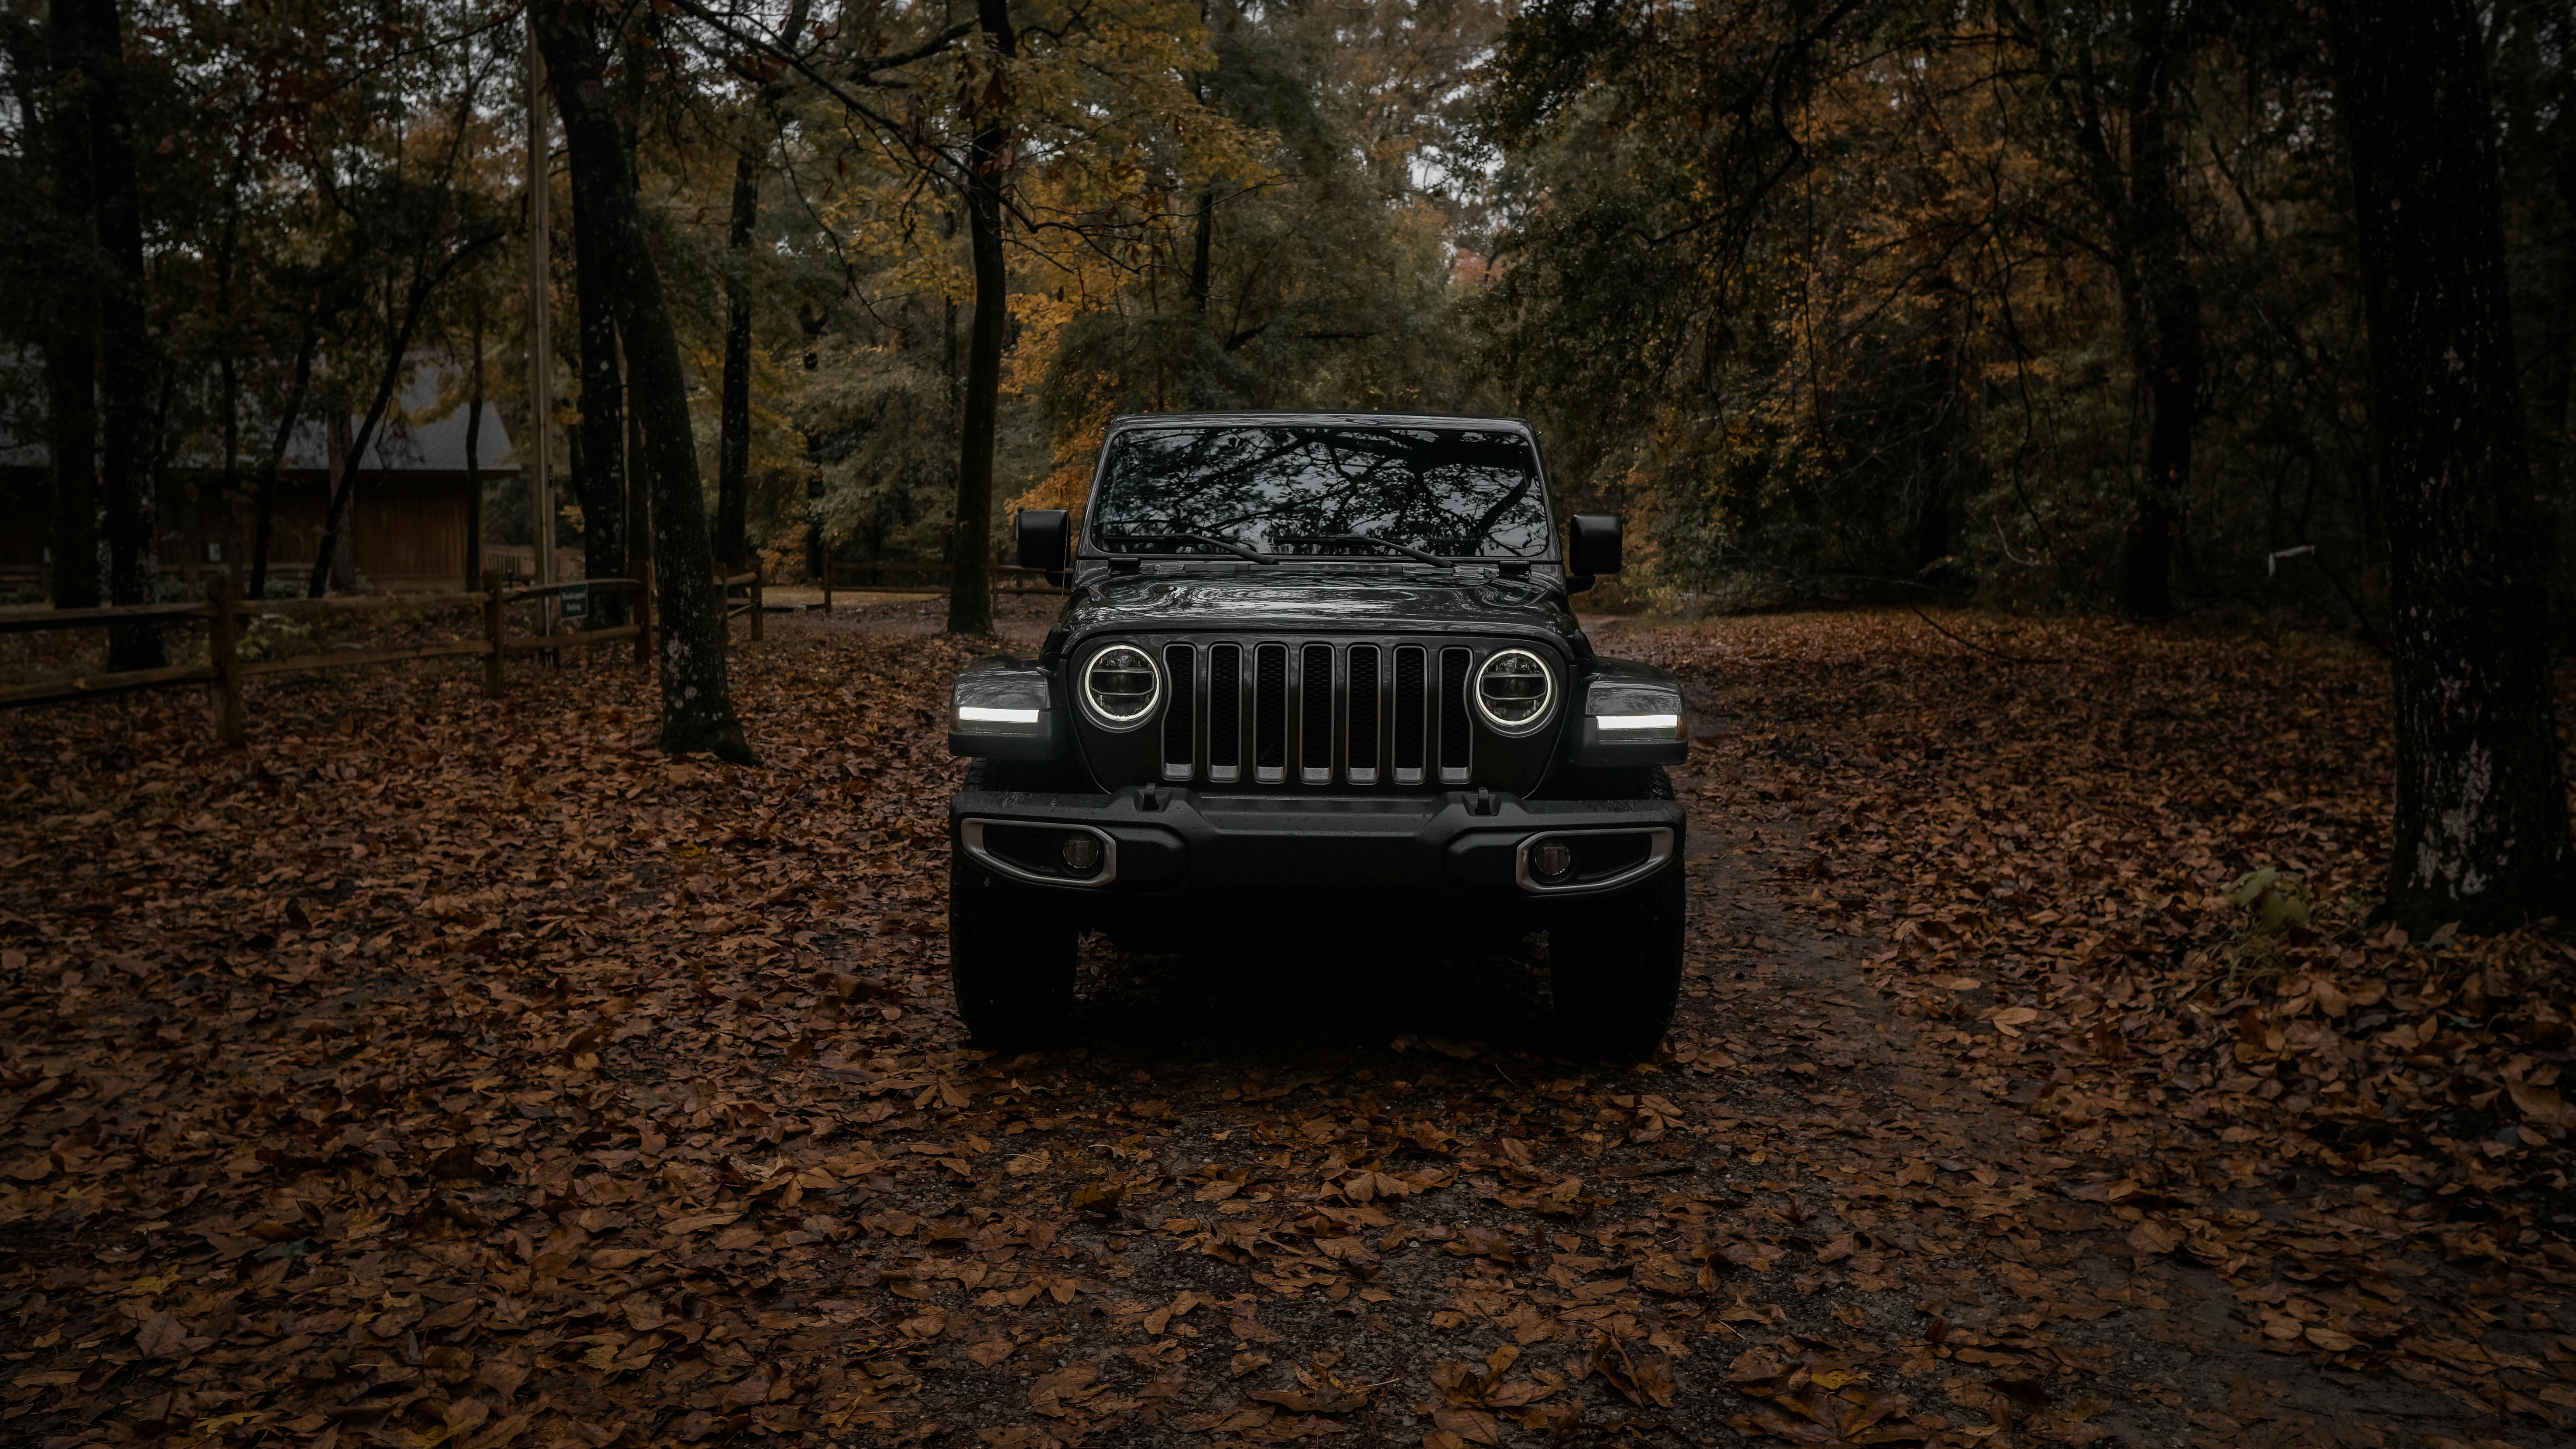 Jeep Wrangler Photos, Download The BEST Free Jeep Wrangler Stock Photos &  HD Images